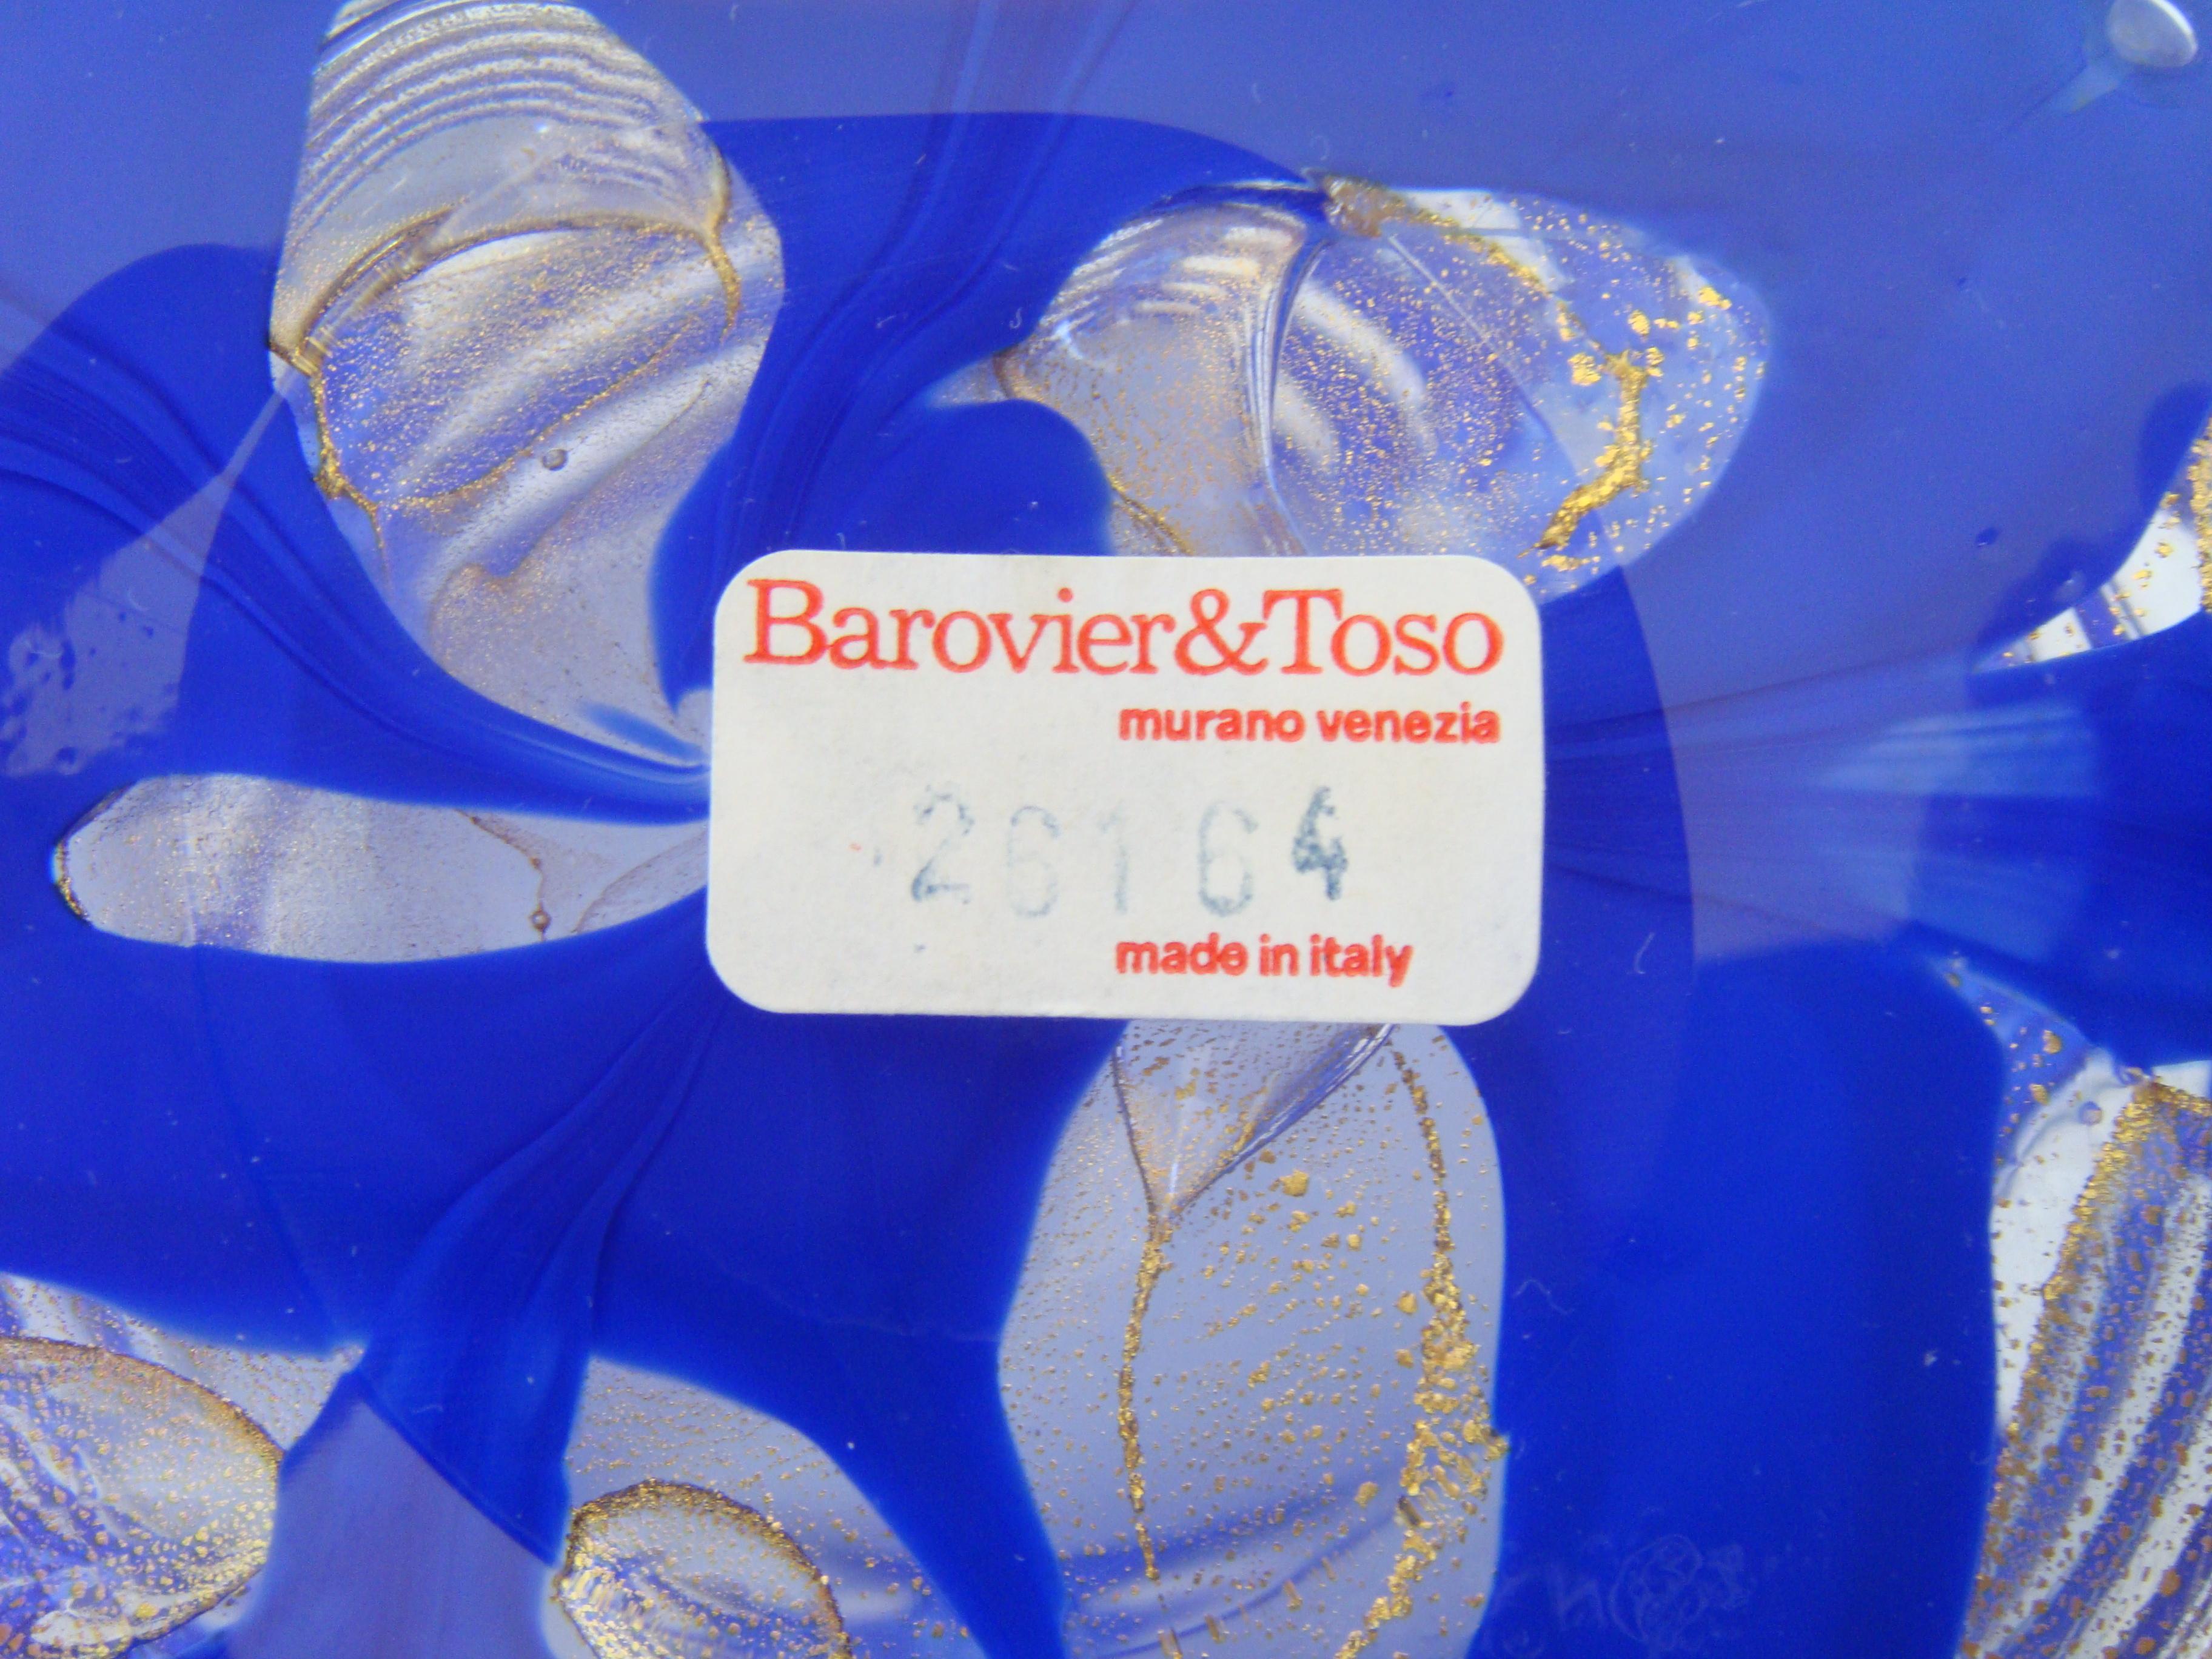 Bold strokes of royal blue intermixed with eyelets of gold dust. The vase is engraved Barovier and Toso at the base, along with a paper label with the model number. It also has a clear plastic Barovier & Toso label attached to the surface along the